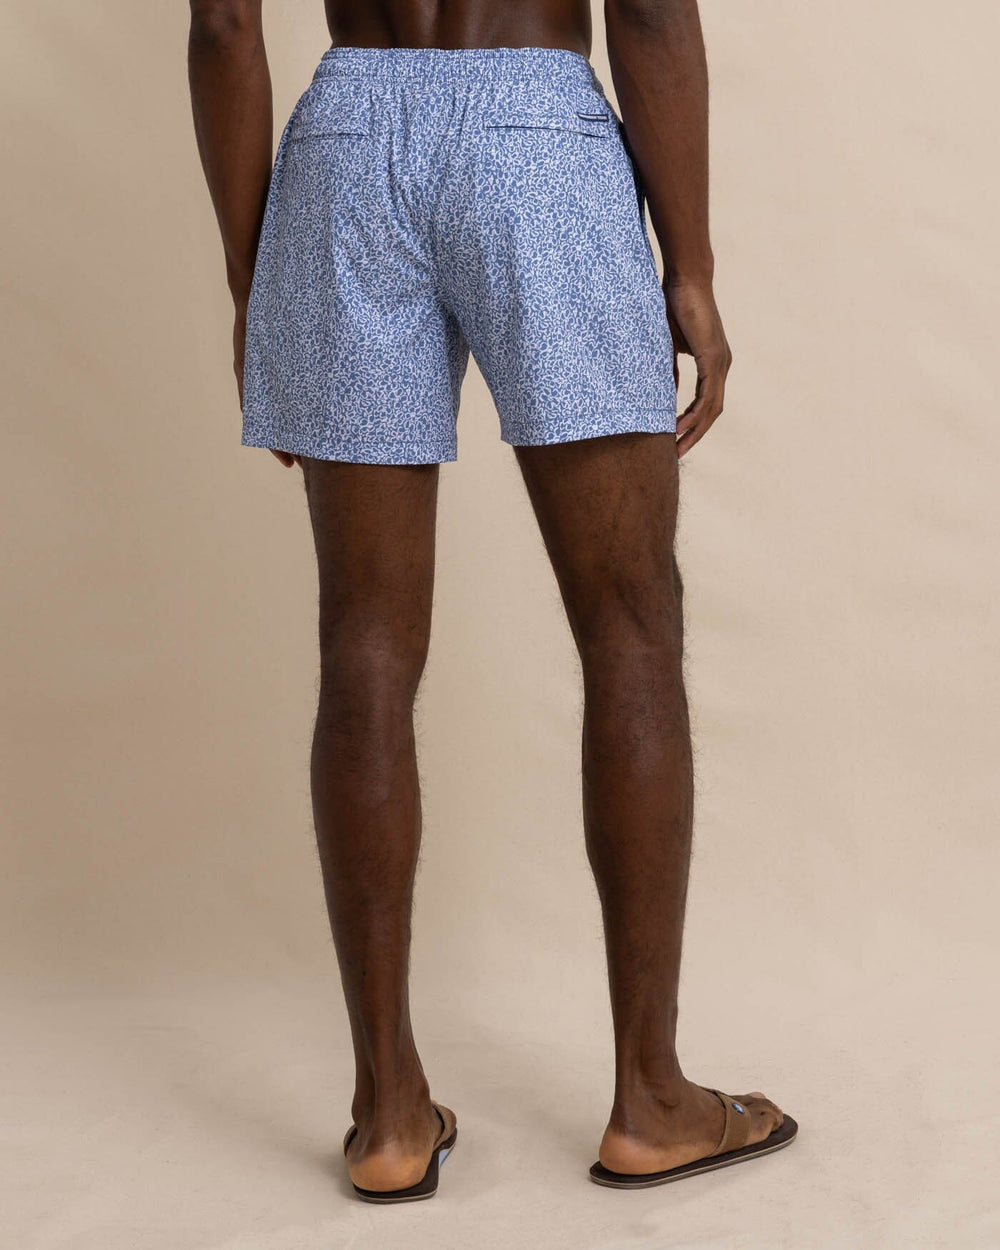 The back view of the Southern Tide That Floral Feeling Swim Trunk by Southern Tide - Coronet Blue